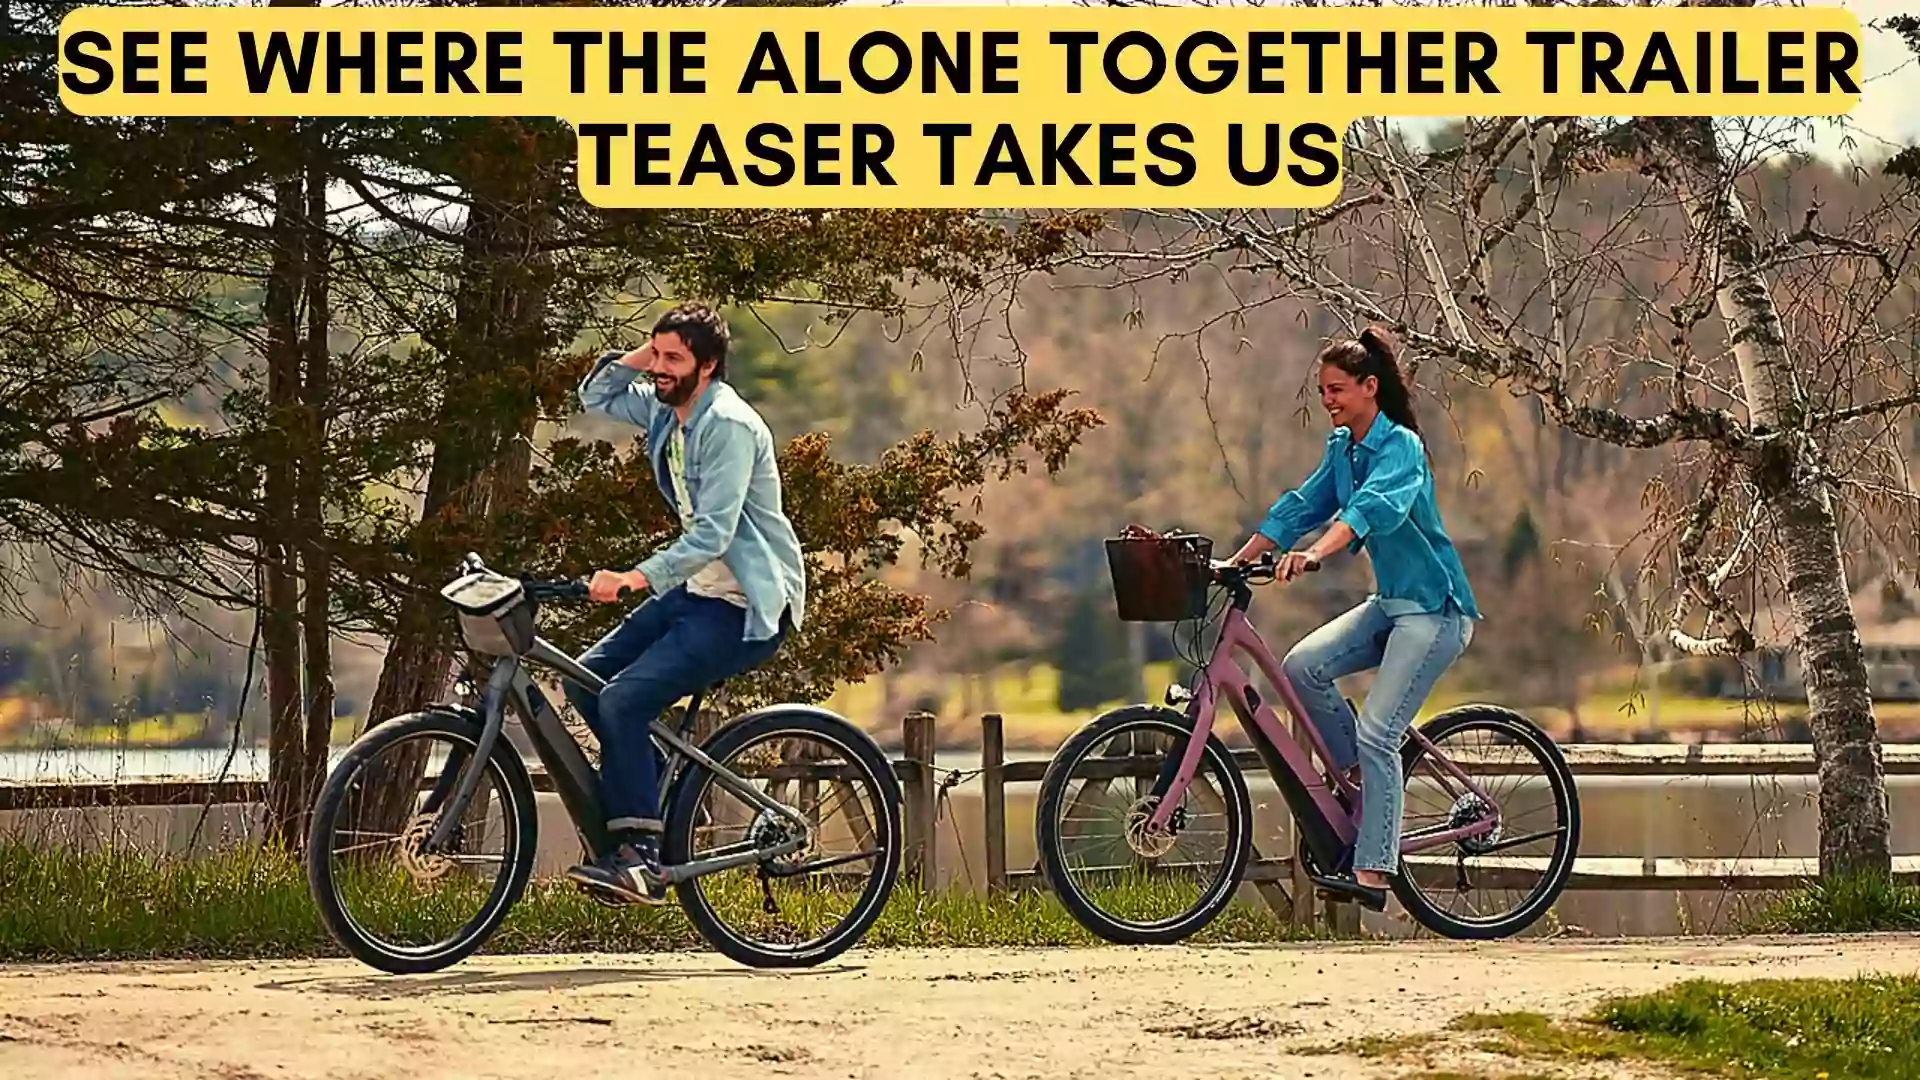 See where the Alone Together Trailer Teaser takes us